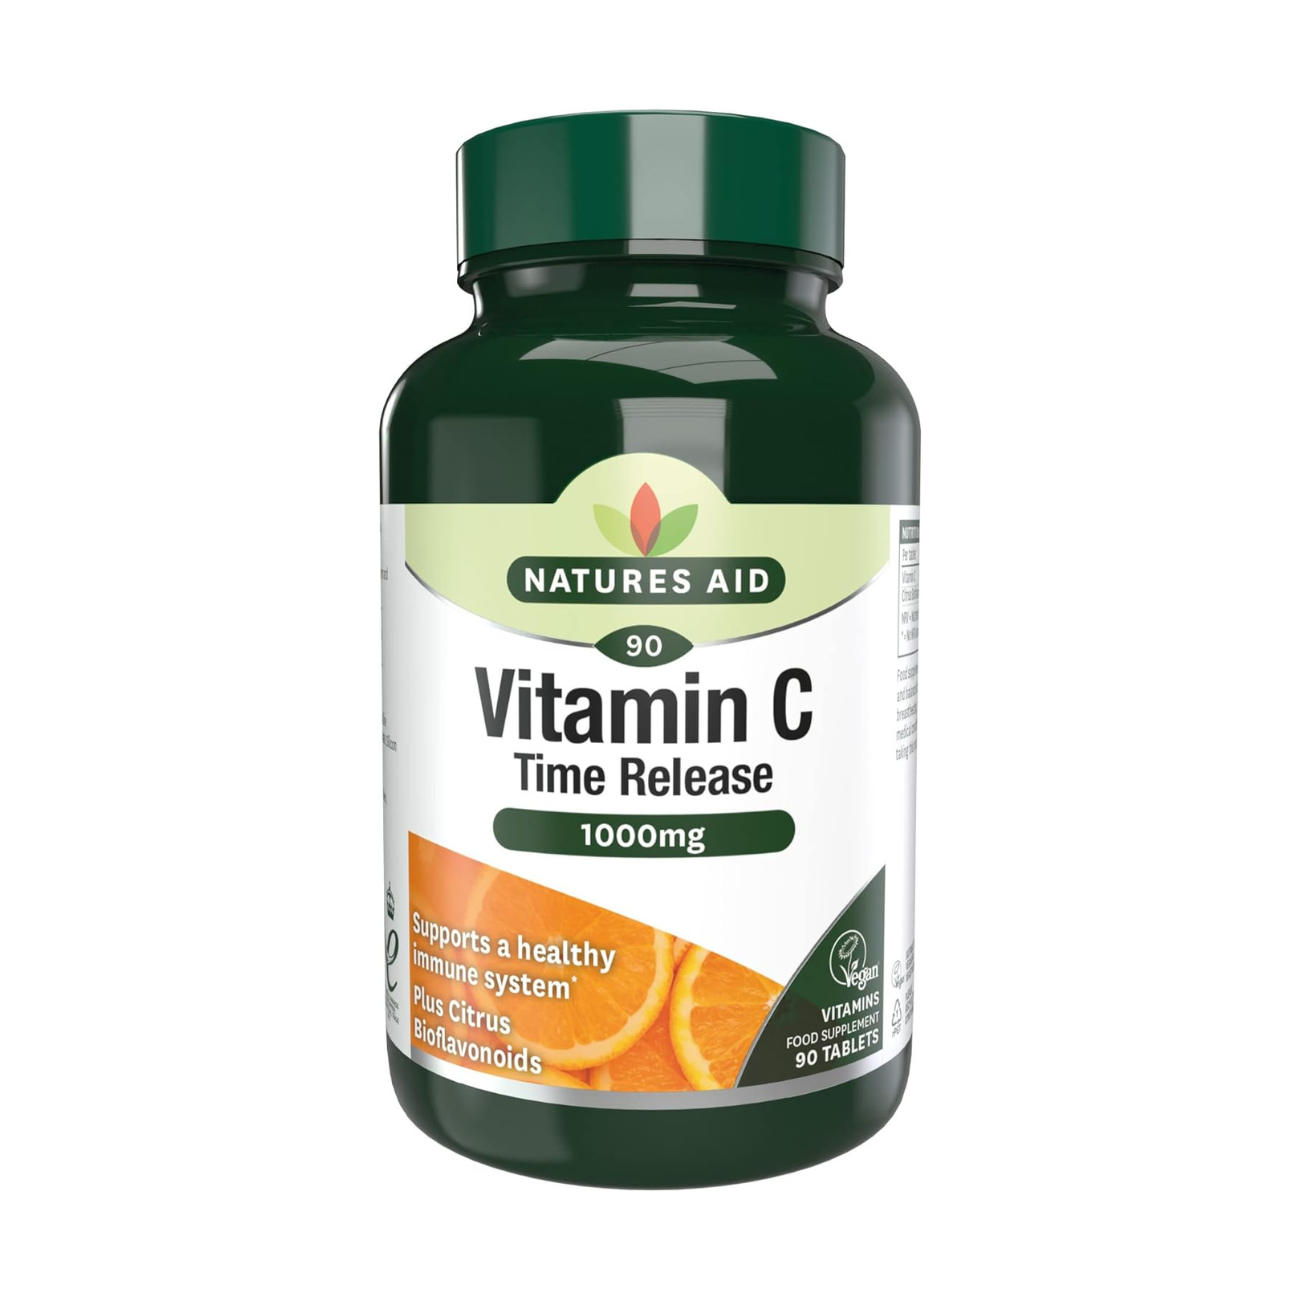 Vitamin C Time Release 1000mg 90 Tablets